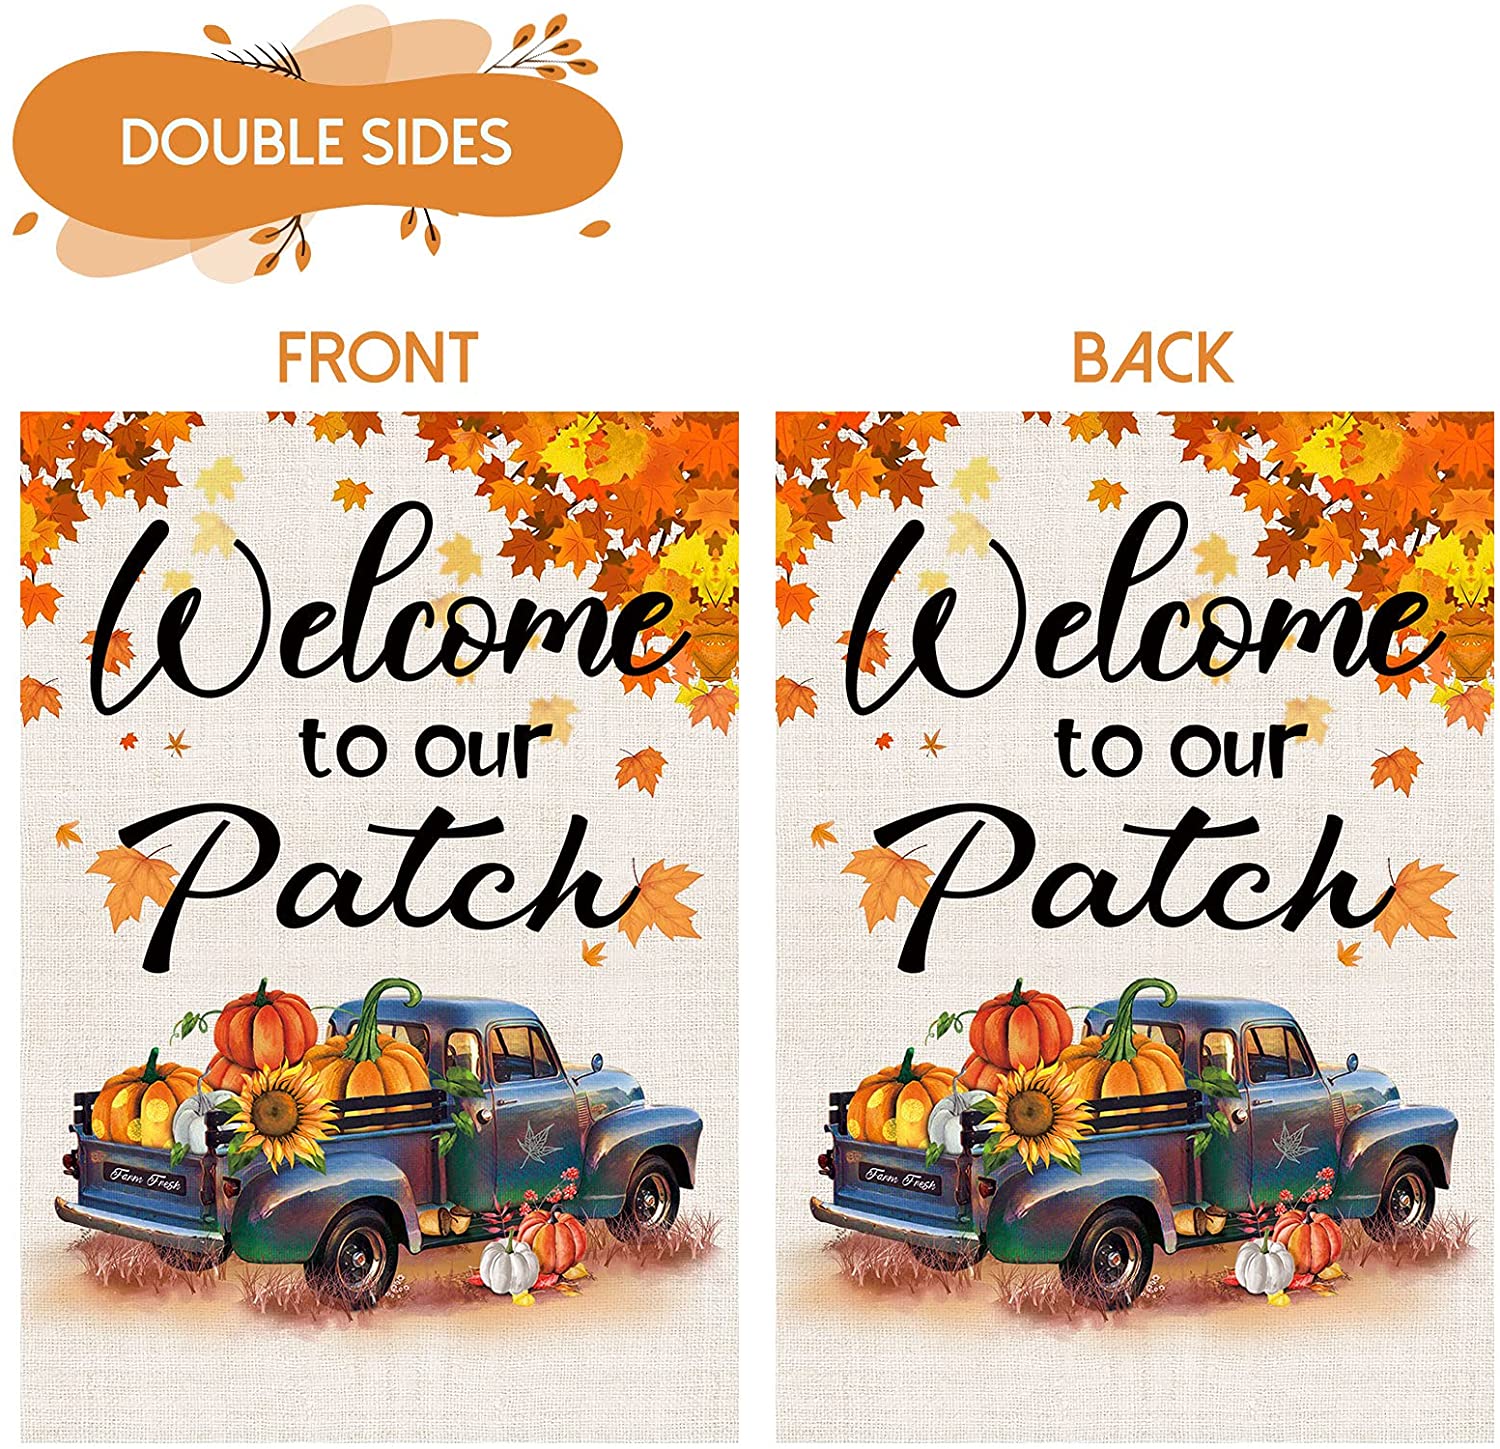 2 Pcs Double Sided Farm Fresh Fall Garden Flags 12 x 18 (Truck, Bicycle)